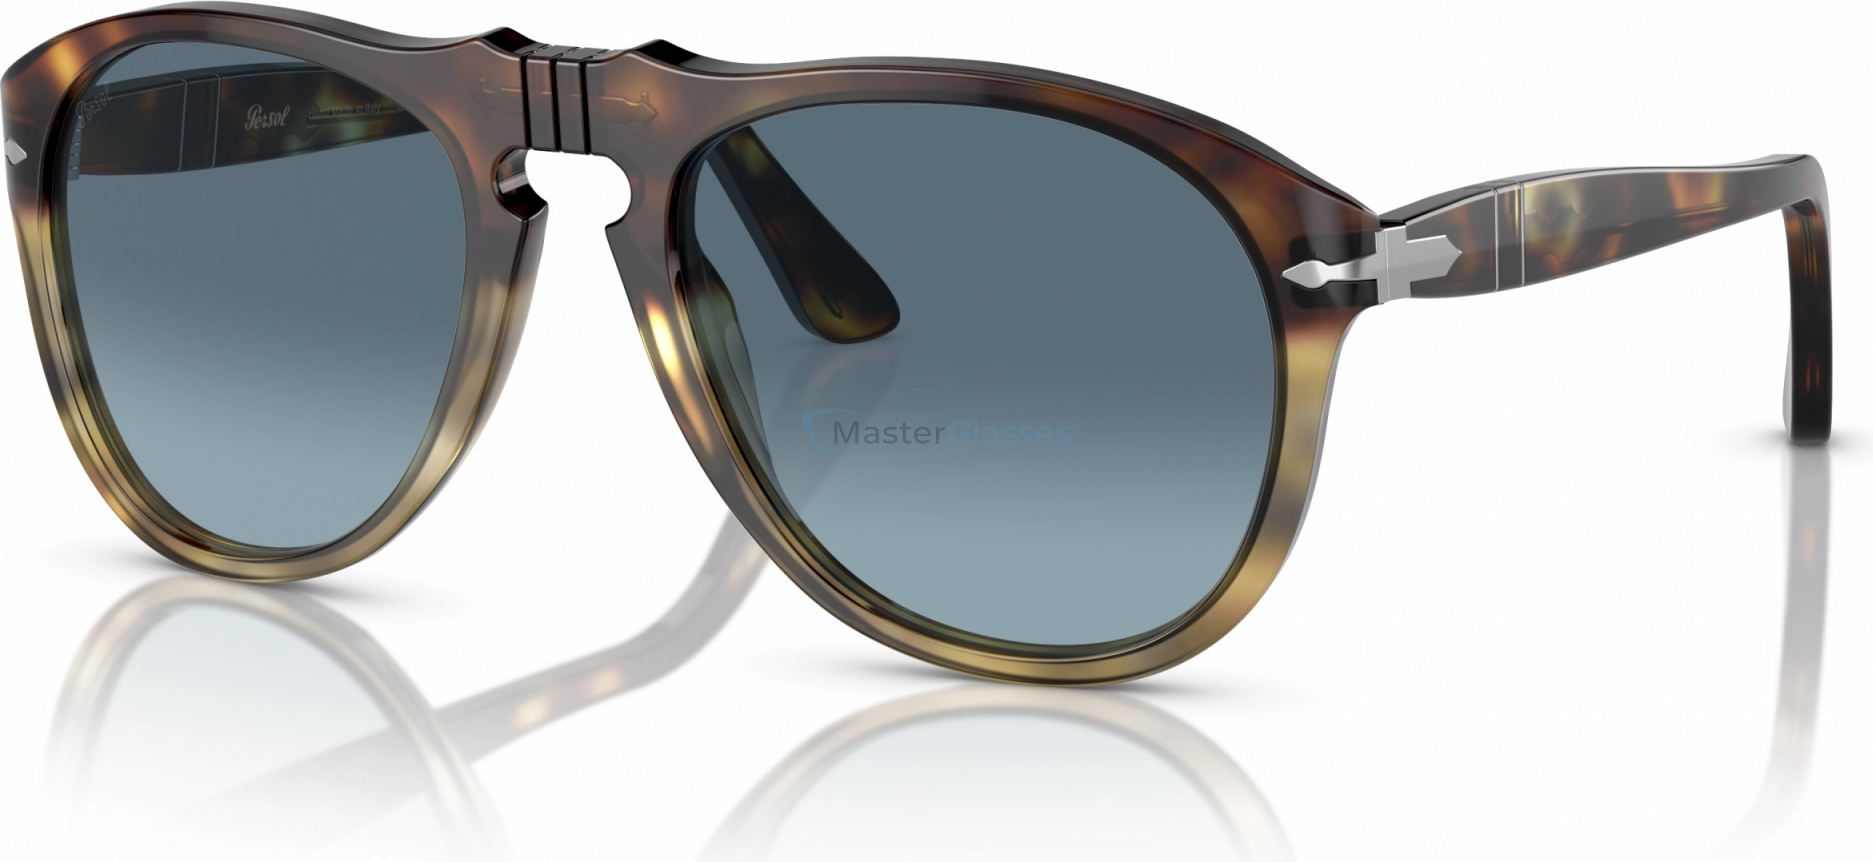   Persol PO0649 1158Q8 Tortoise Spotted Brown